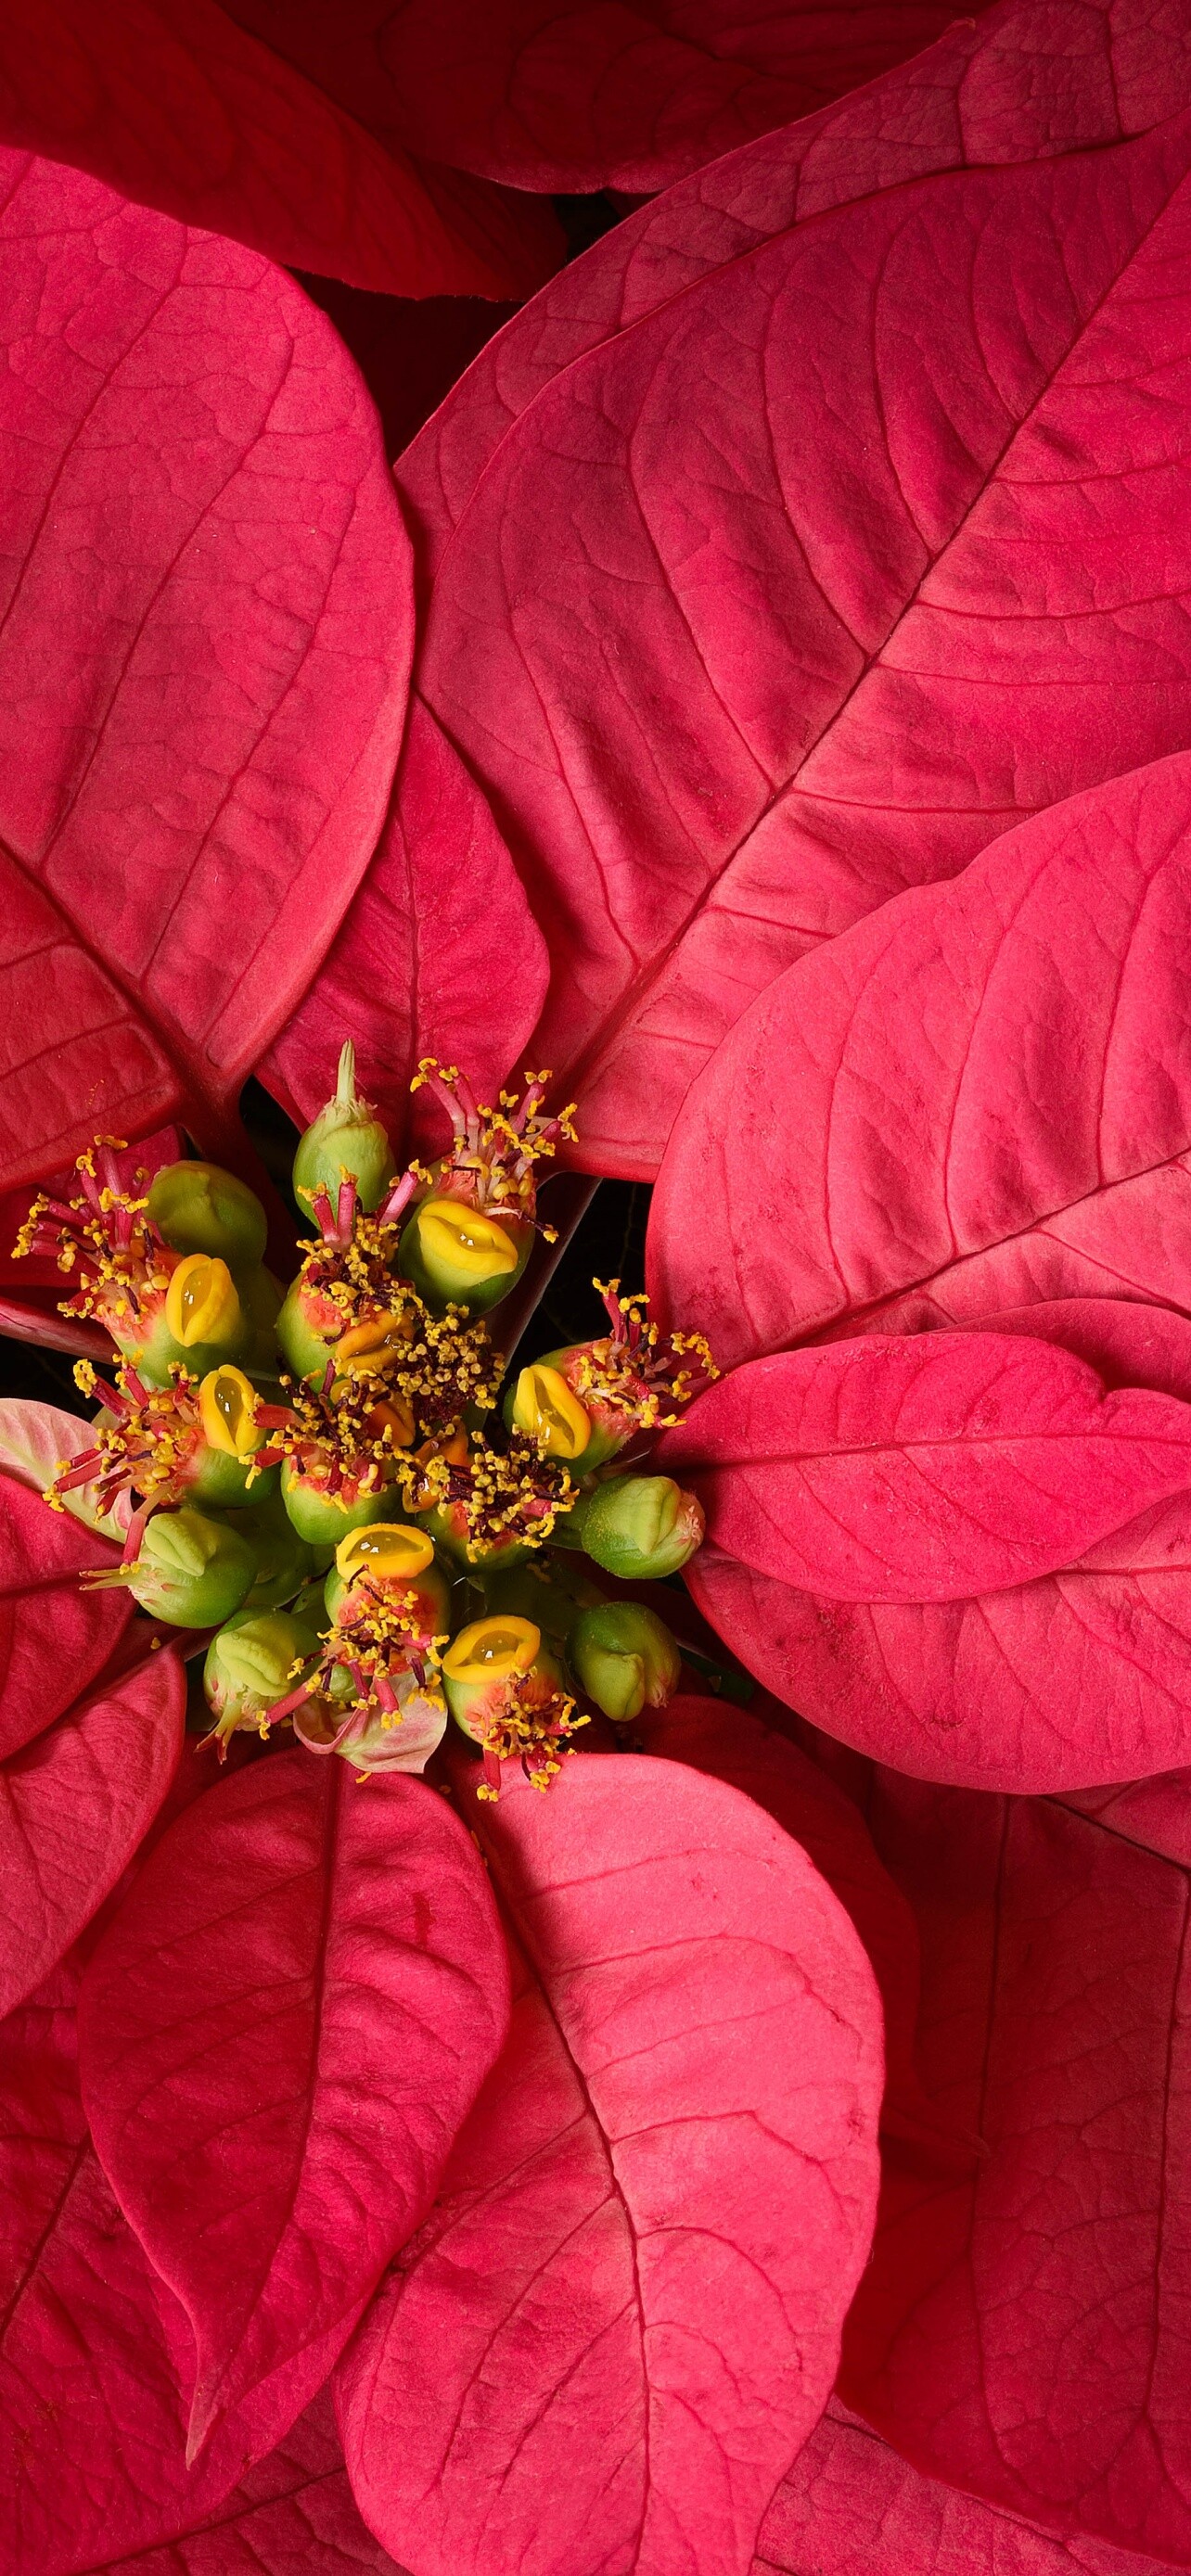 Poinsettia: The world's most economically important potted plant. 1290x2780 HD Wallpaper.